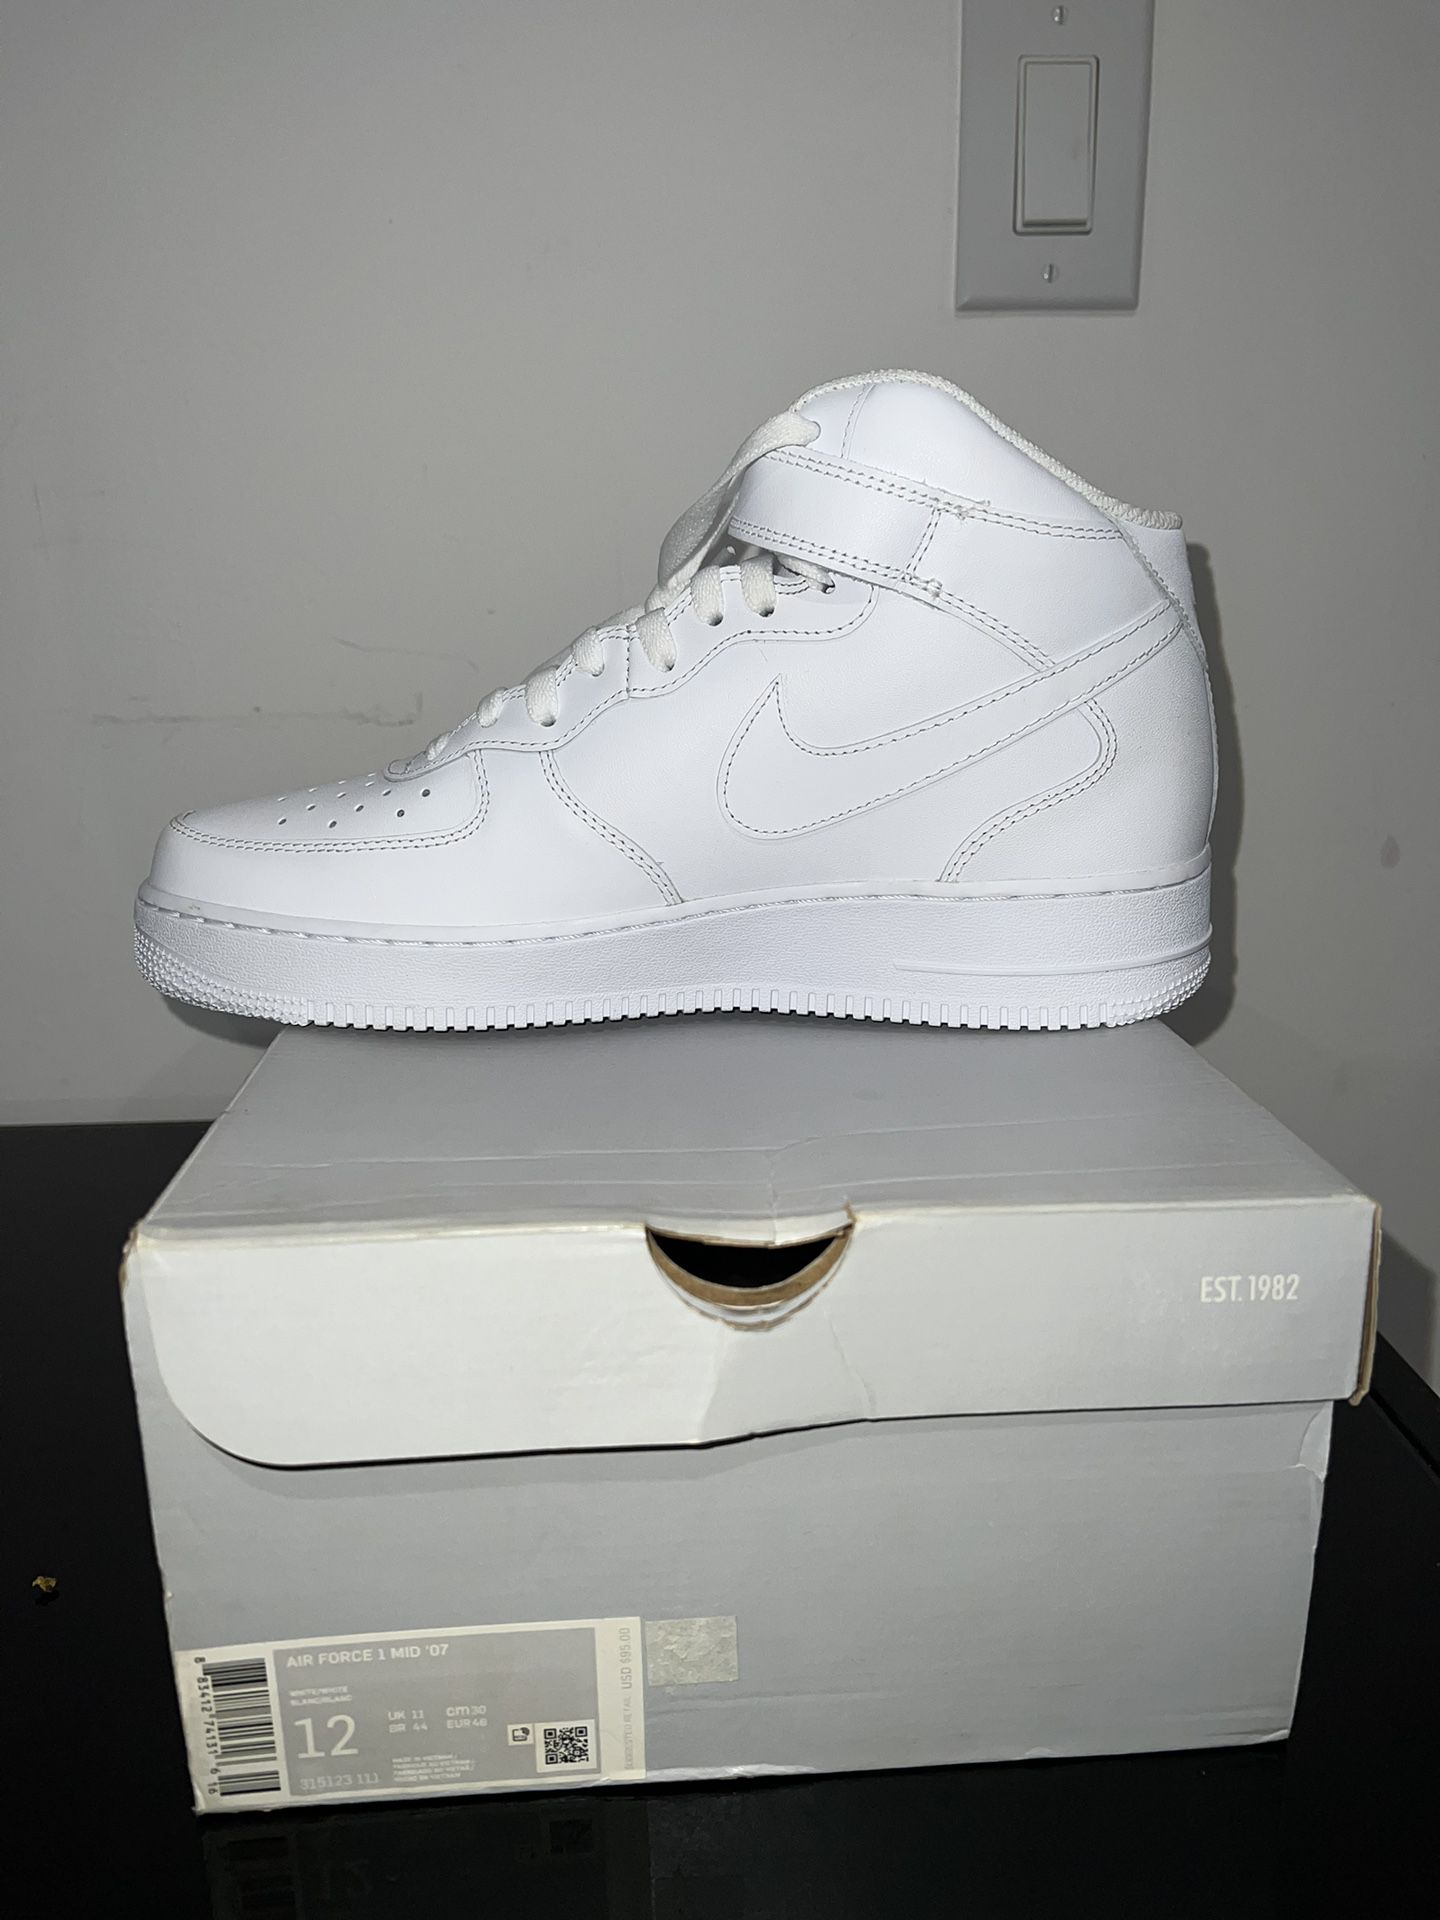 Nike x Off White Air Force 1 Mid for Sale in Palm Beach Shores, FL - OfferUp